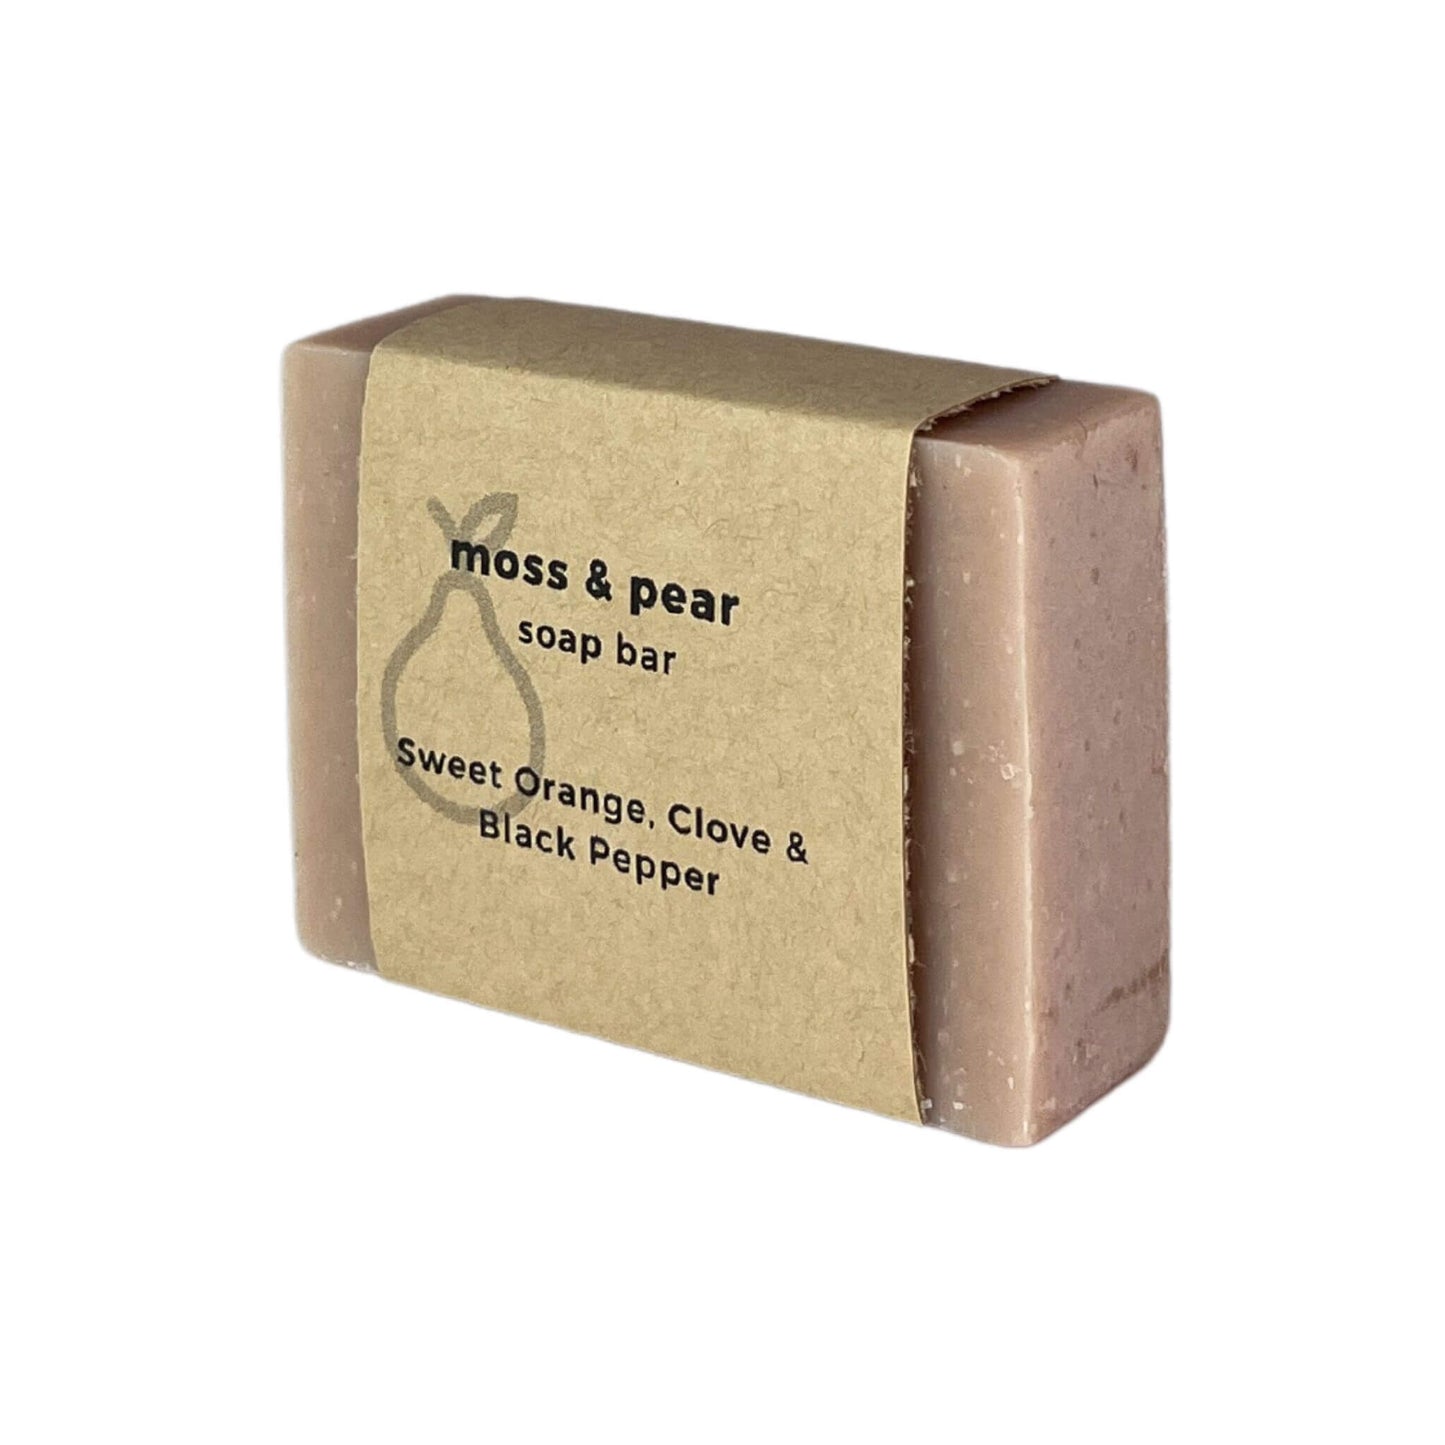 shampoo and soap bar moss & pear - sweet orange, clove & black pepper in brown wrapping